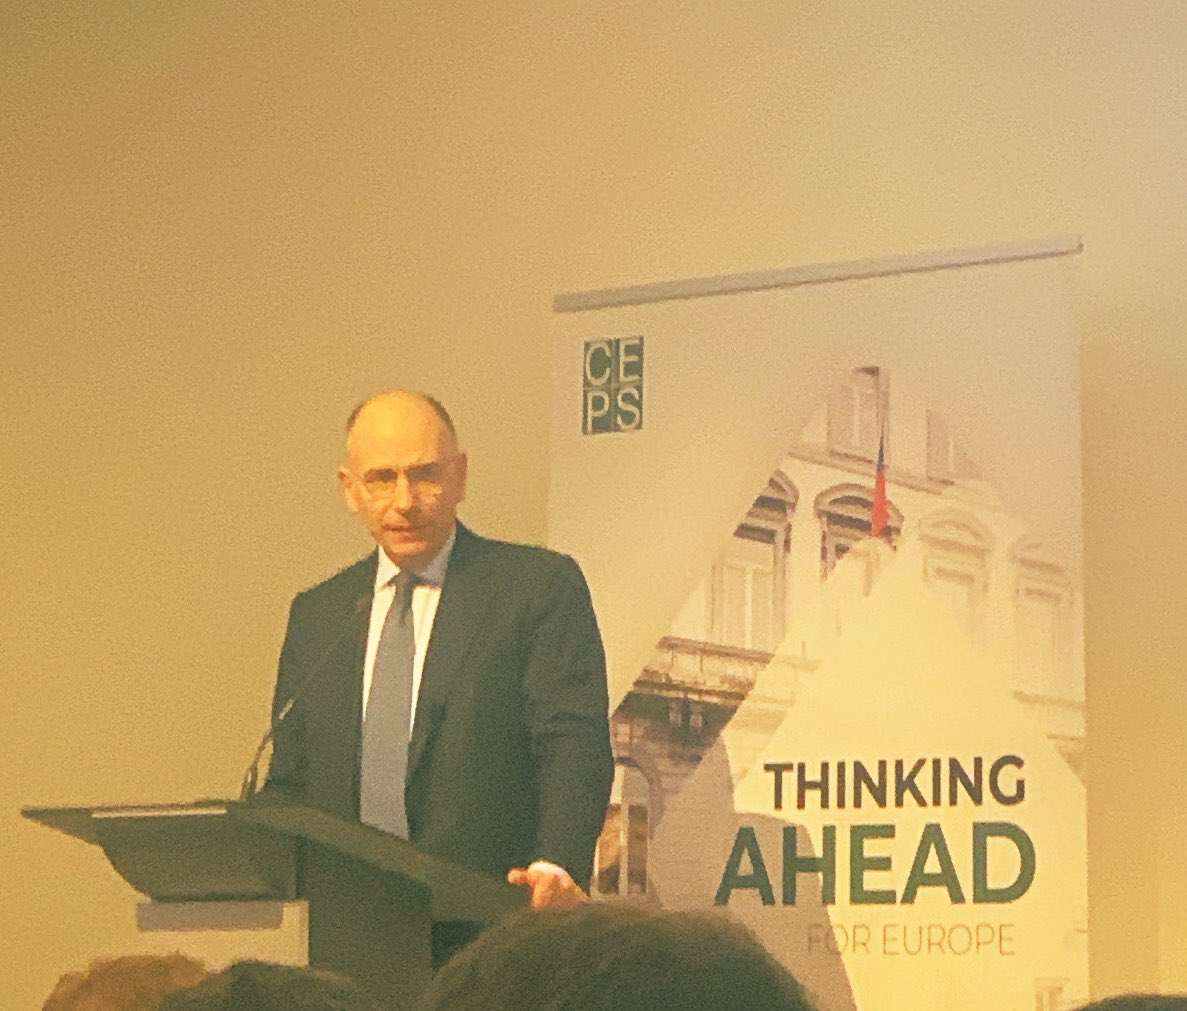 Big crowd at @CEPS_thinktank HQ to meet @EnricoLetta of the future of the EU #SingleMarket,
and many other things, including Territorial Cohesion and #placebased. 

@profAndreaRenda, well known research director at CEPS gives it the thumbs up.
Now up to EC and MS to follow suit.